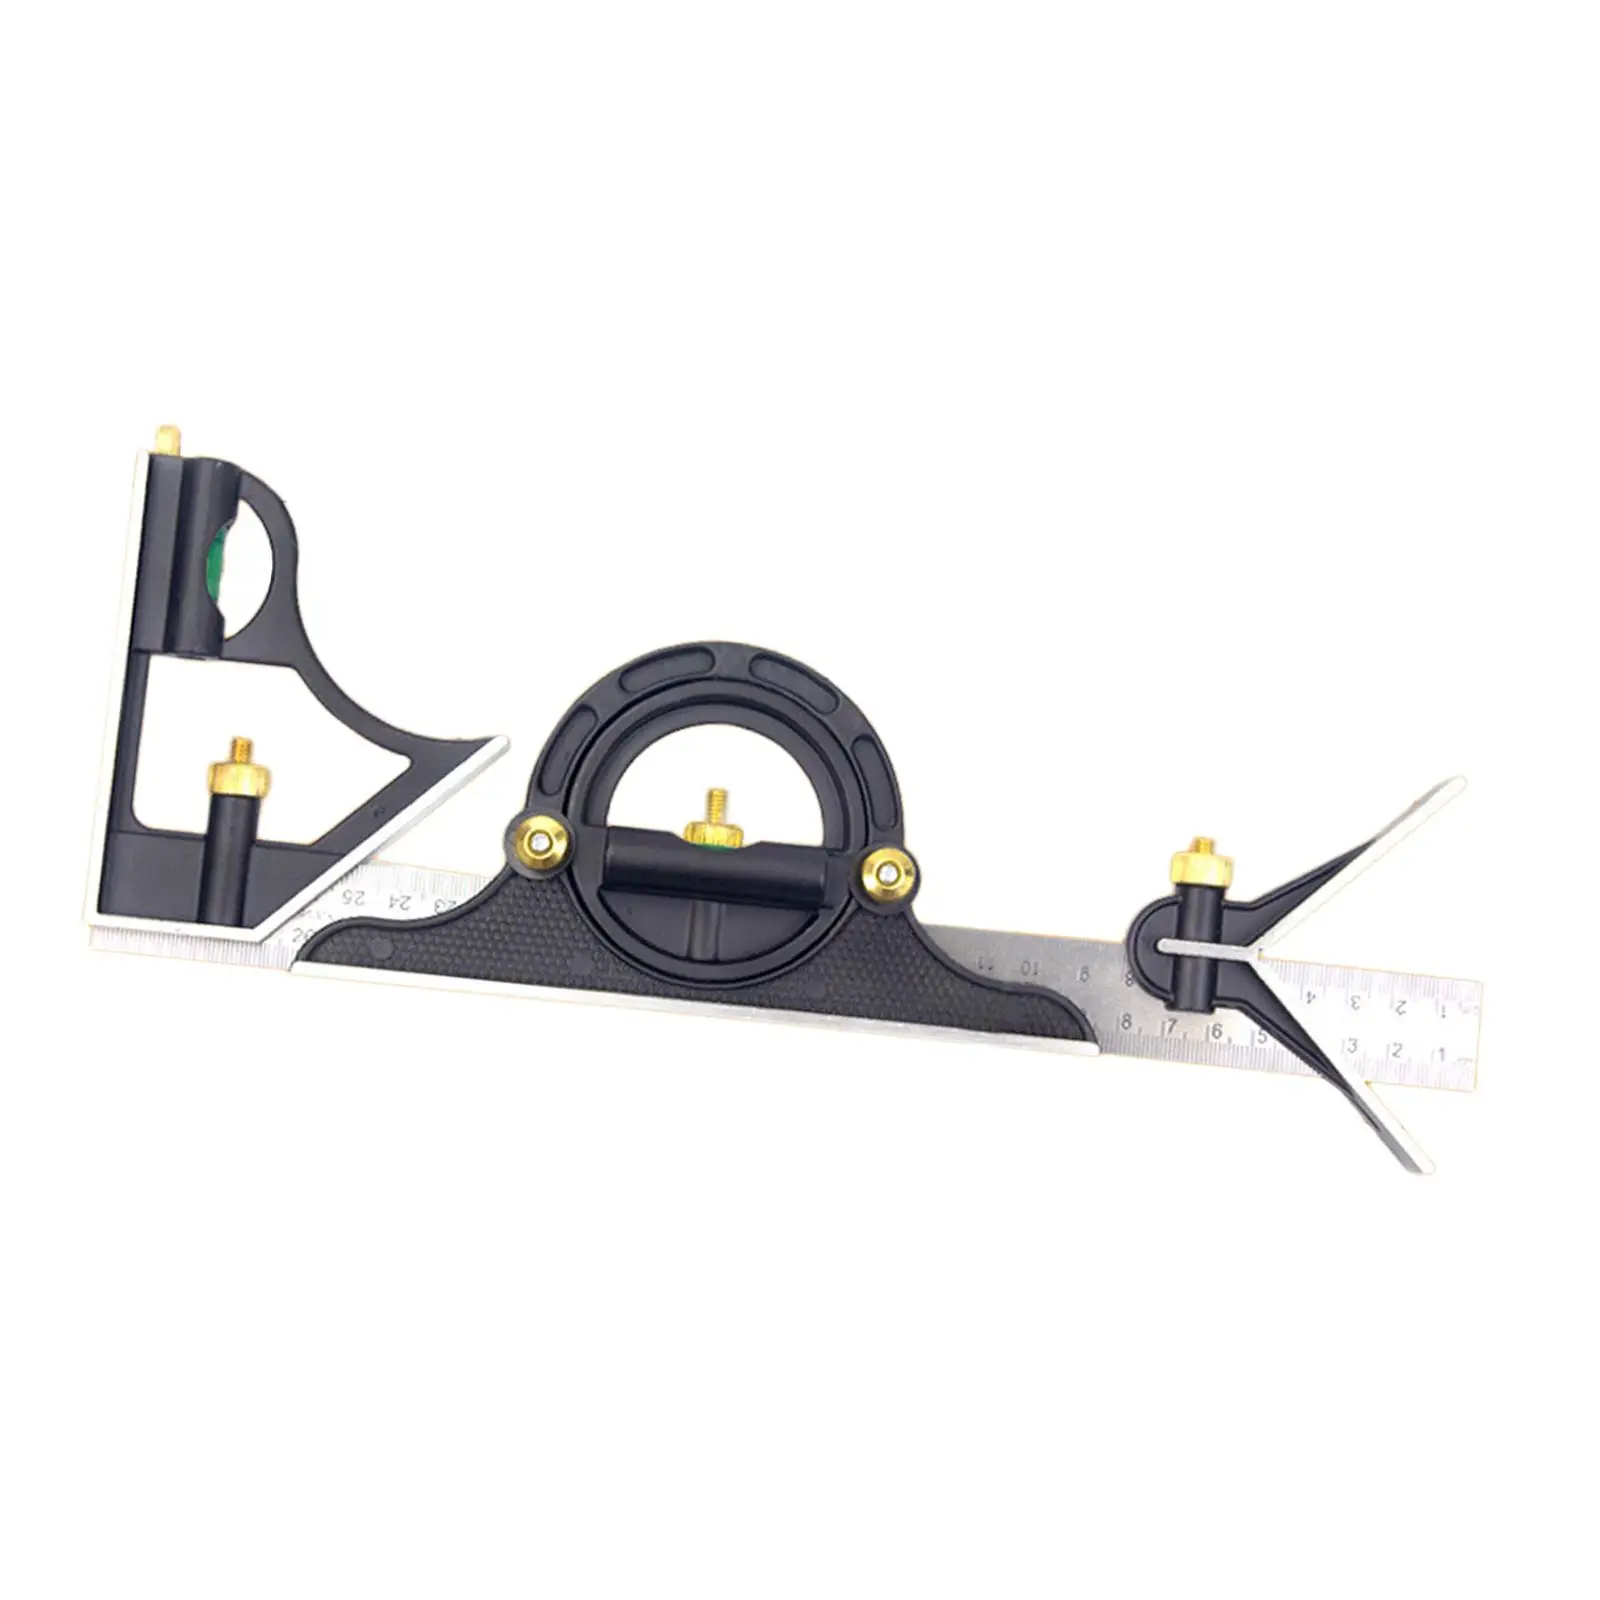 Adjustable Combination Angle Marking Tool Parallel Ruler Professional Multifunctional 45 / 90 Degree Right Protractor Square